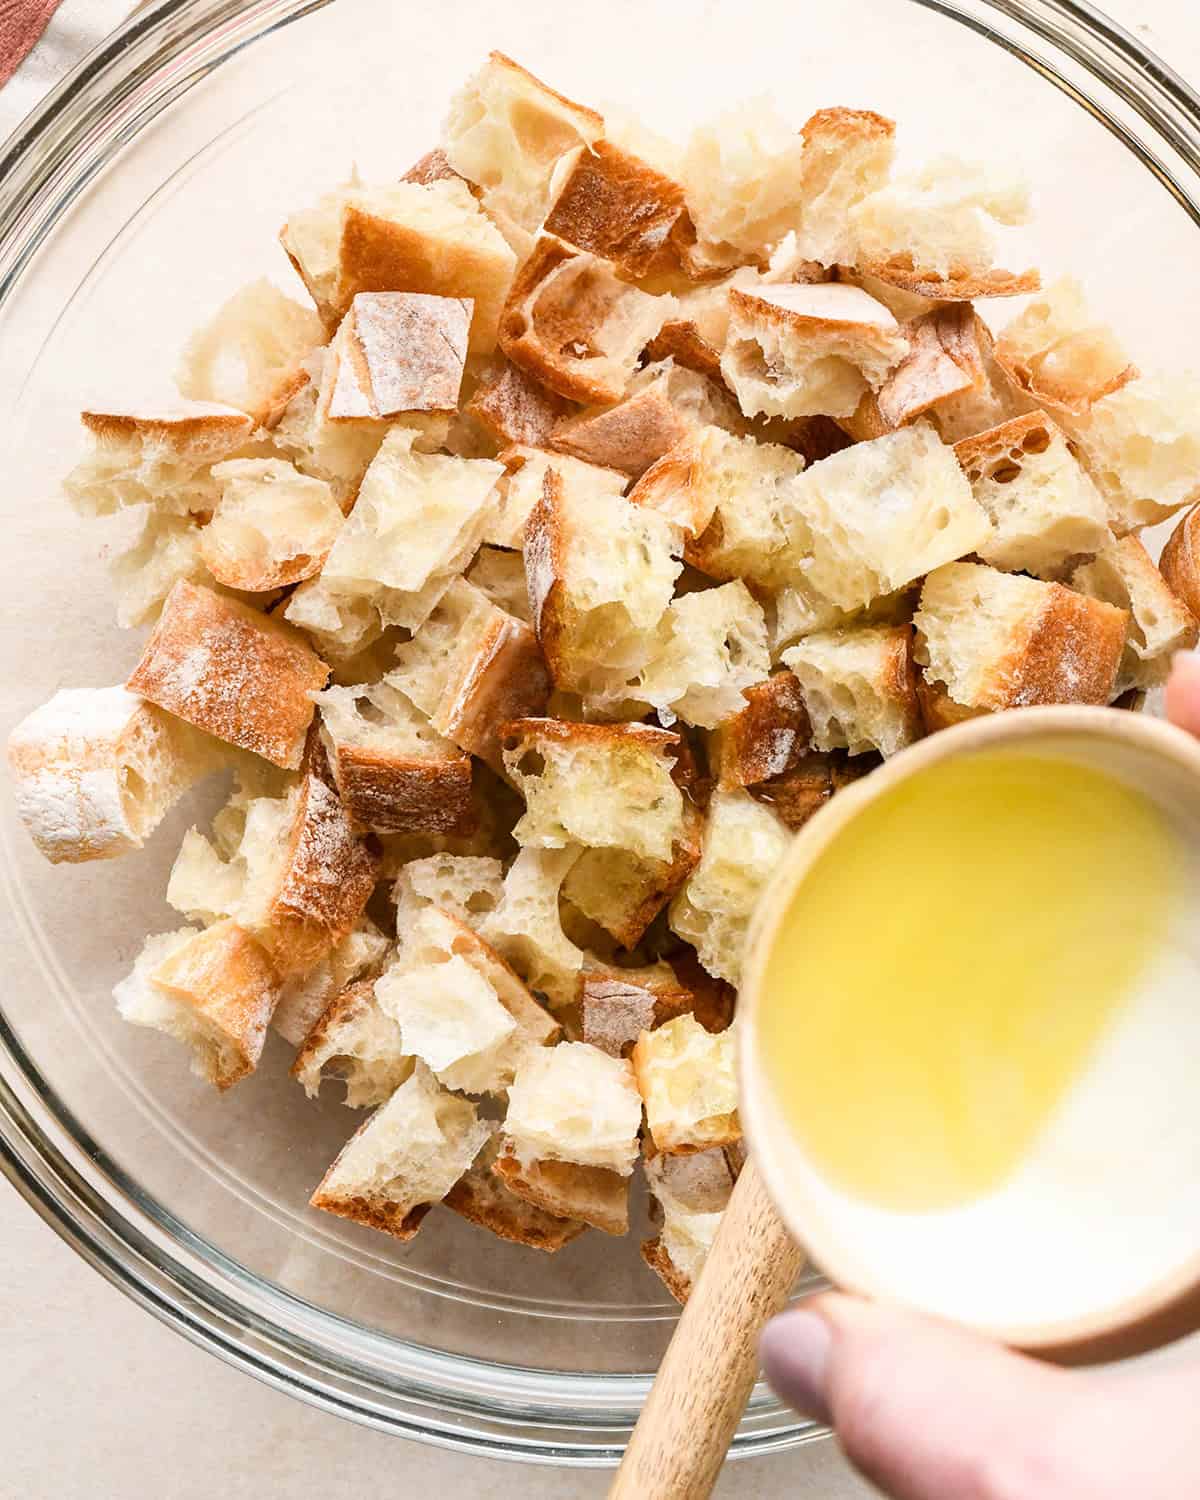 How to Make Croutons - pouring olive oil over bread cubes in a bowl